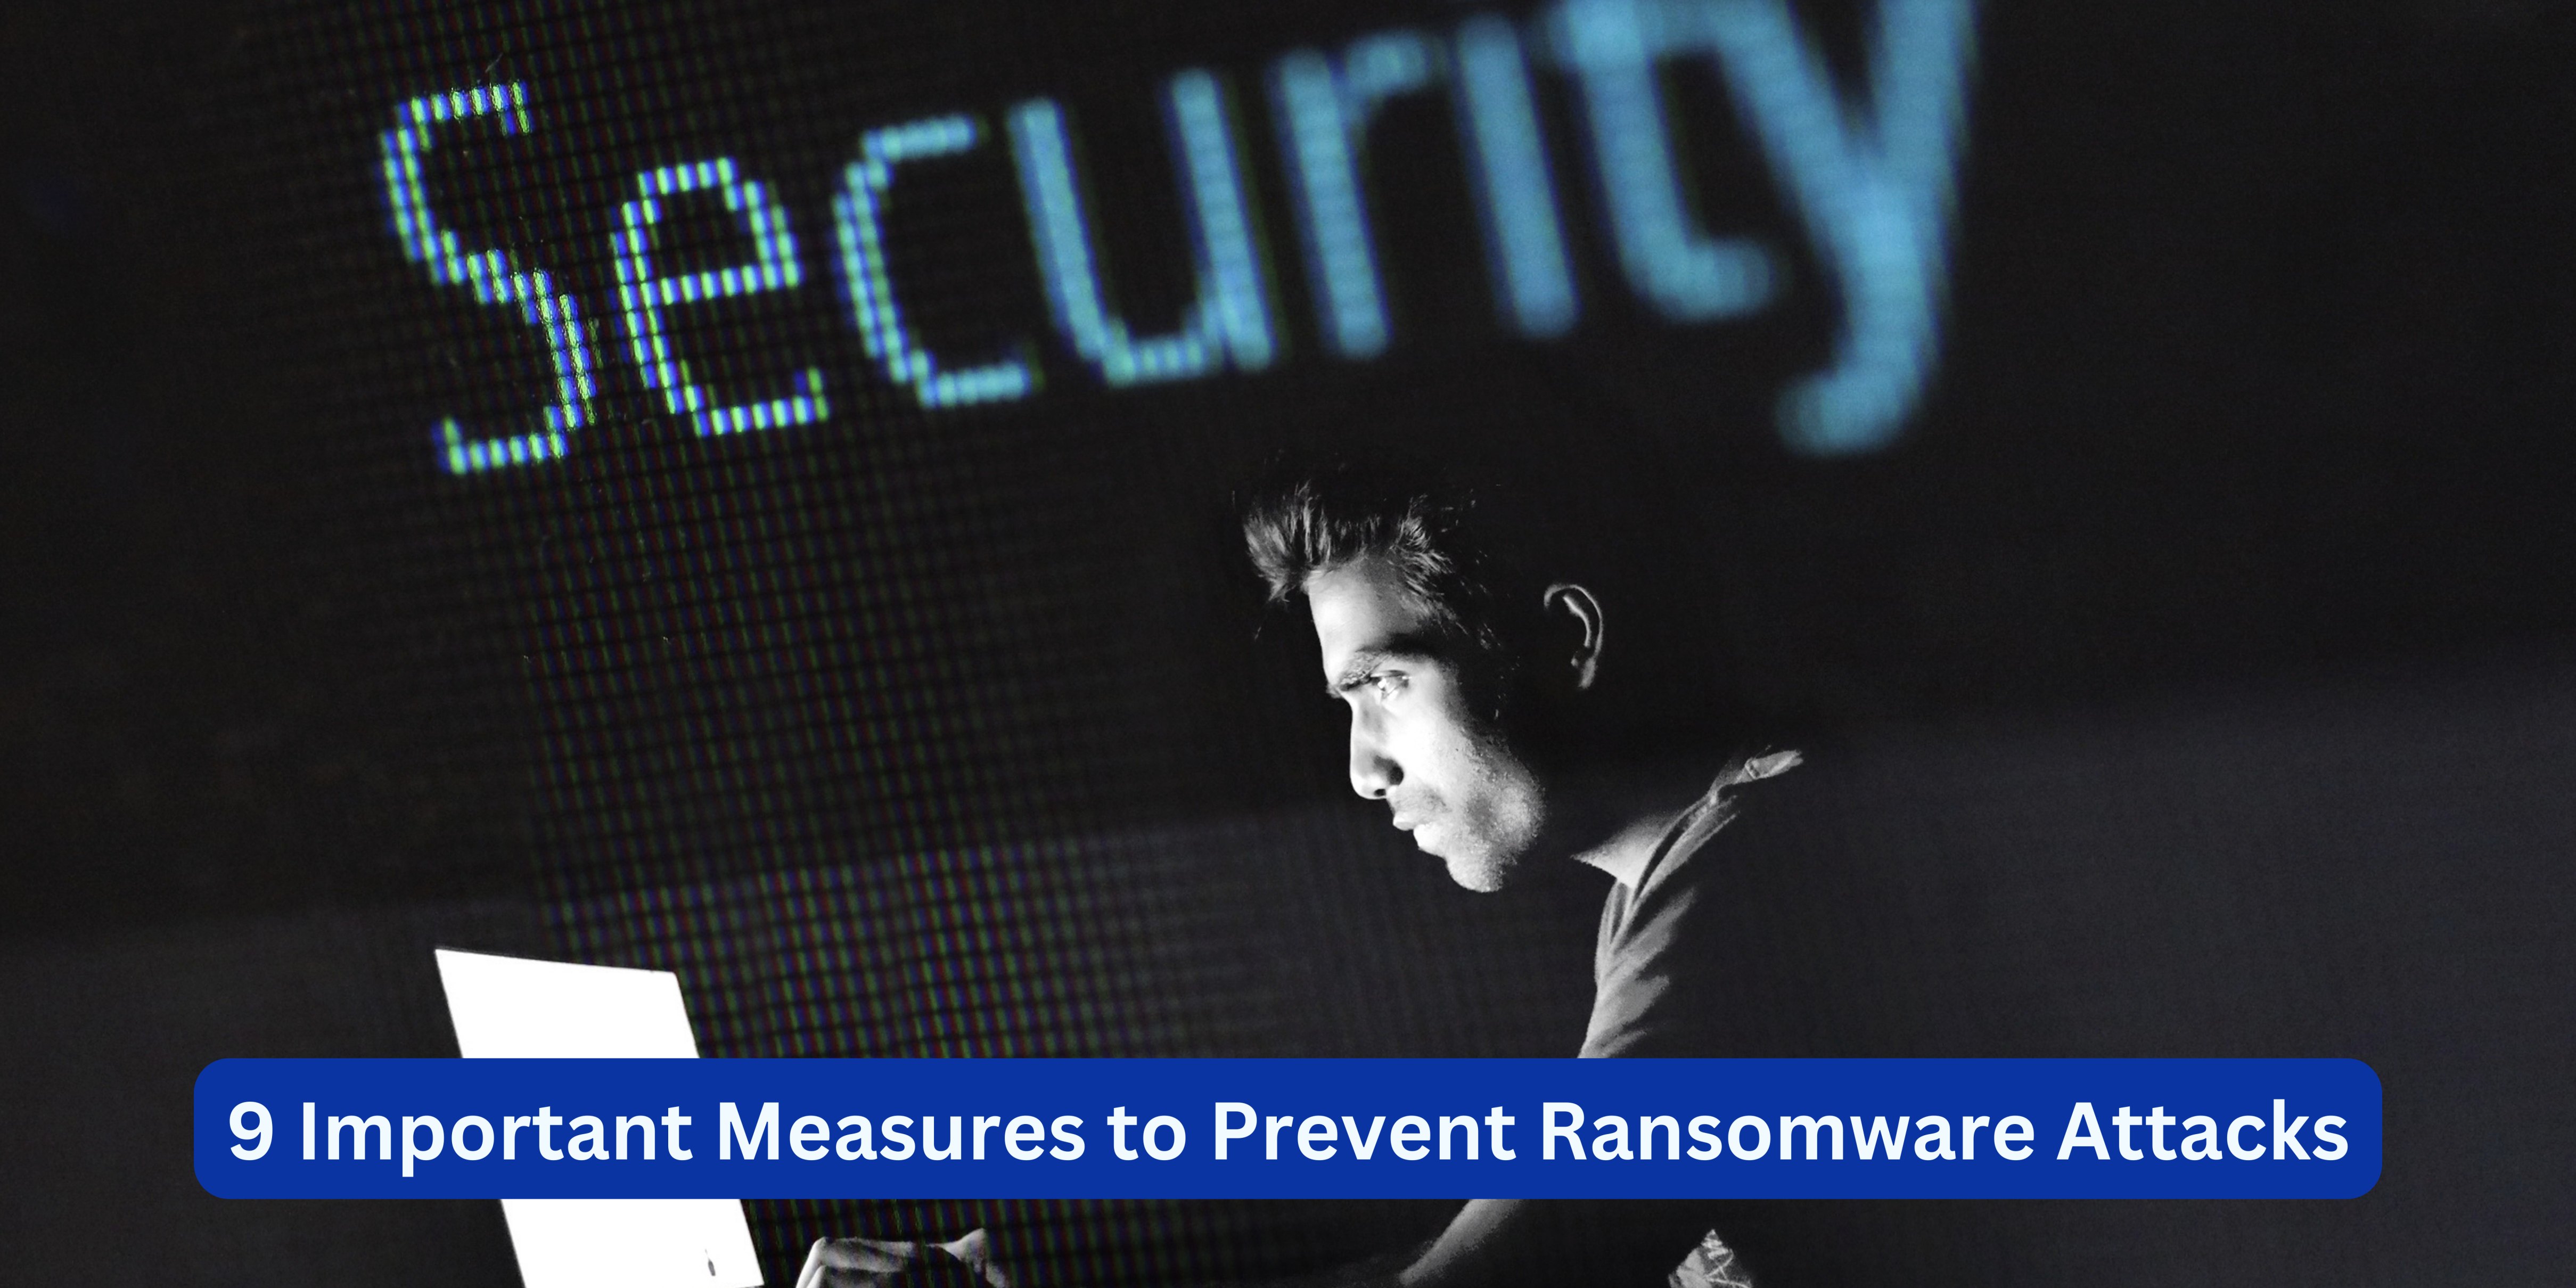 9 Important Measures to Prevent Ransomware Attacks